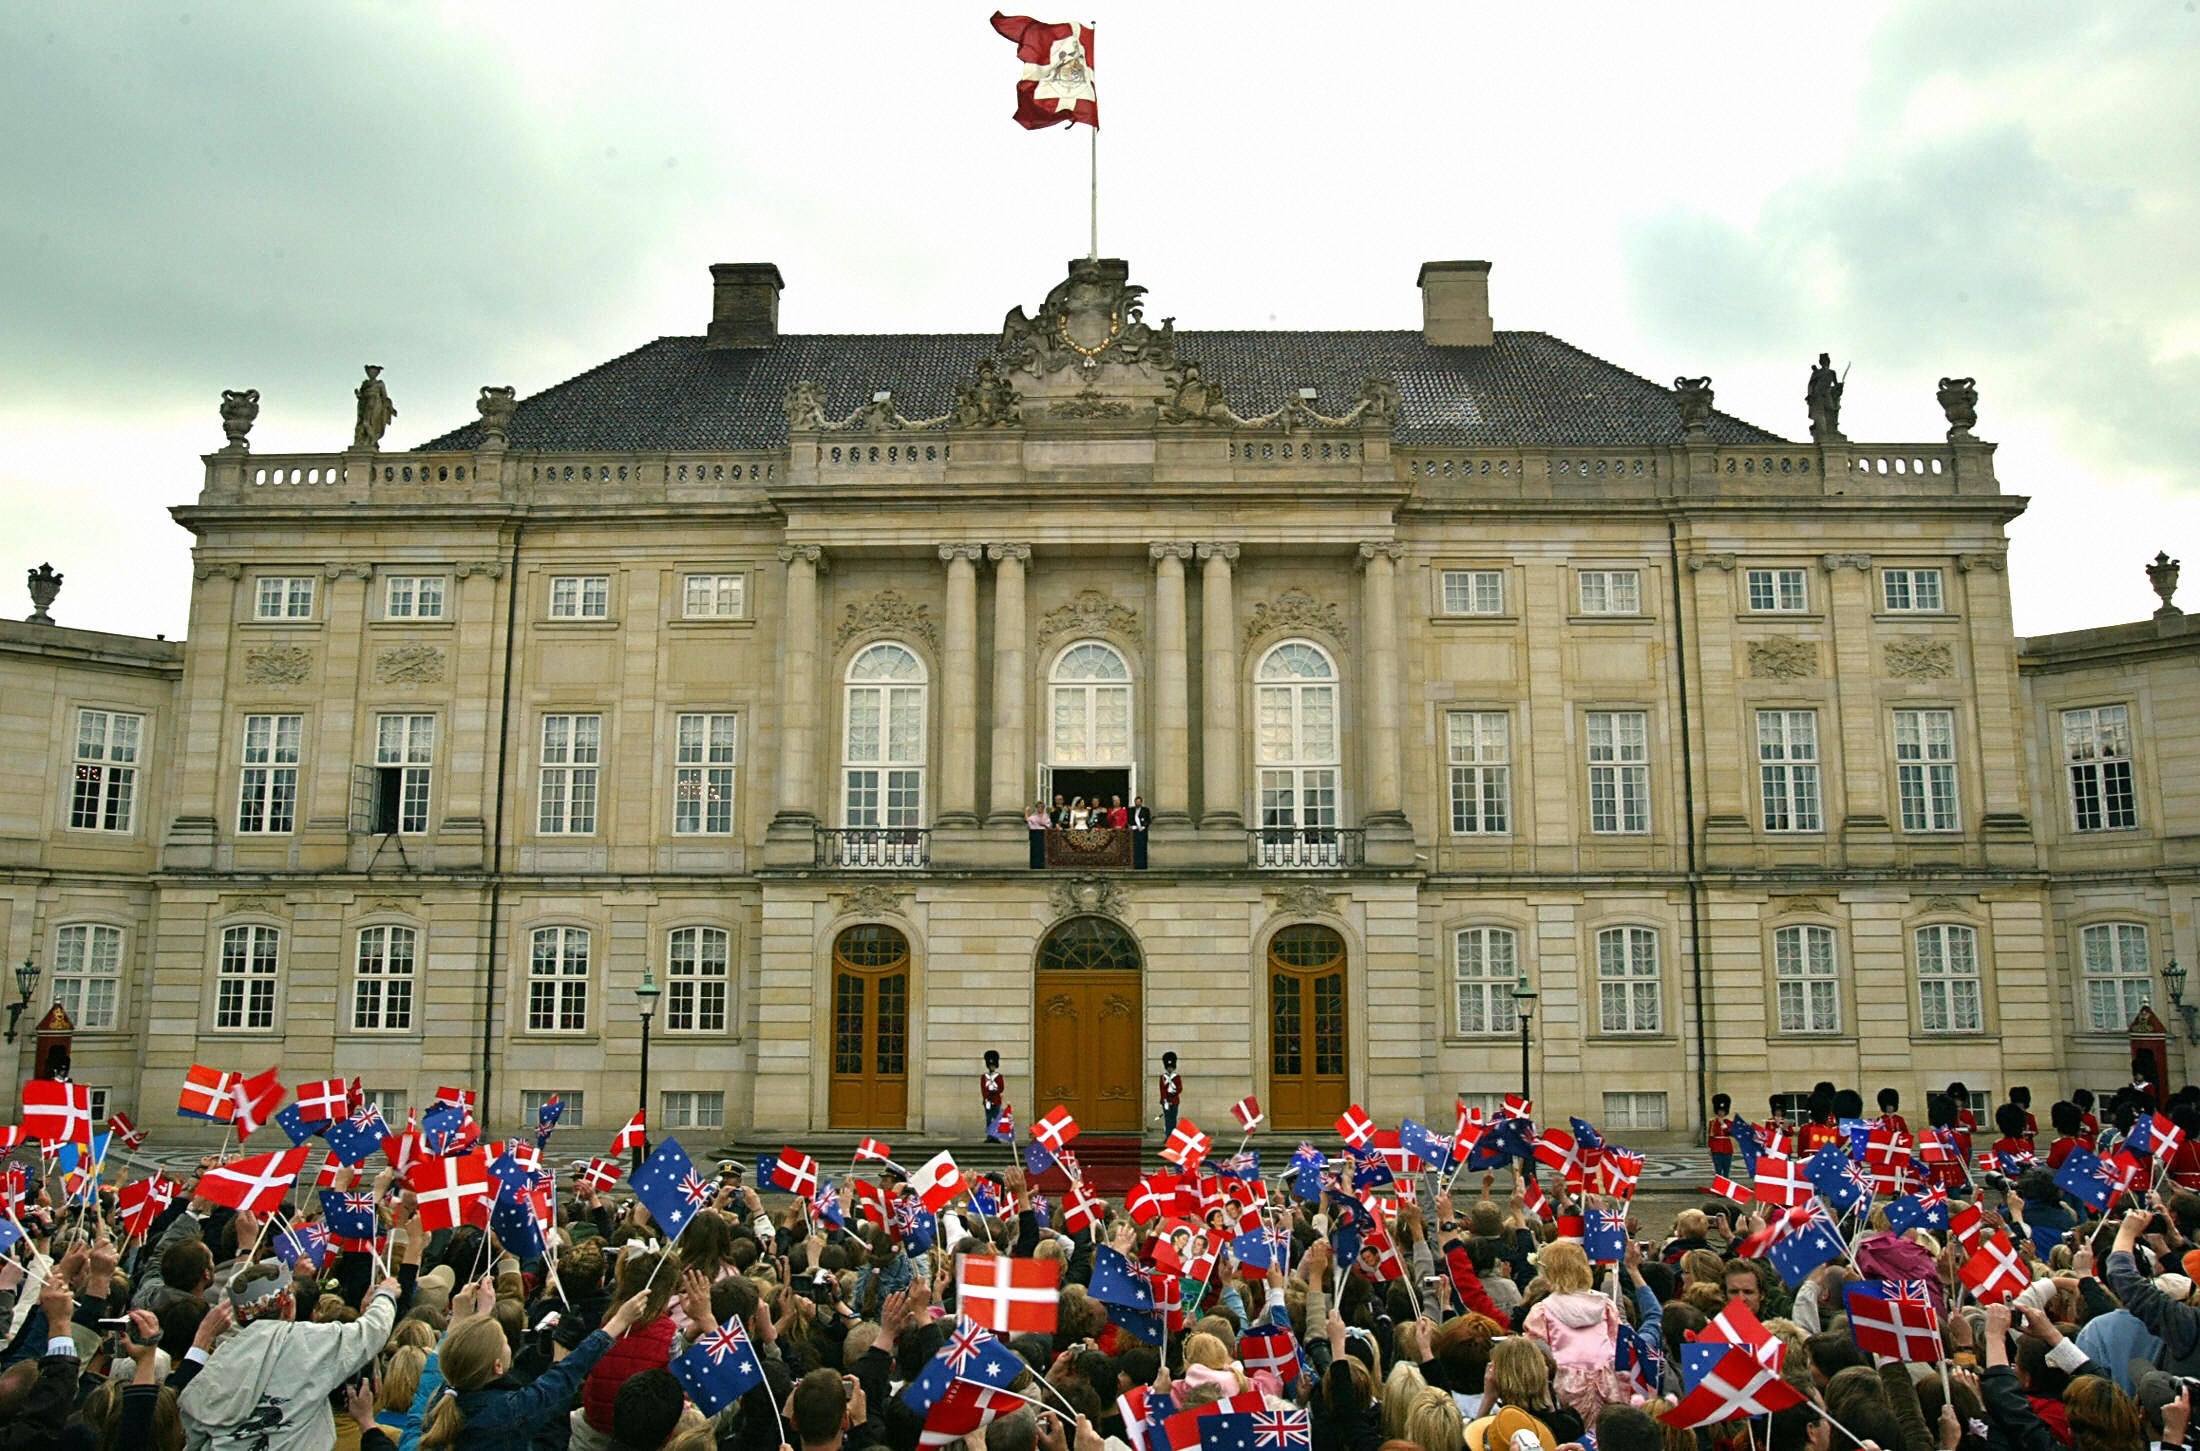 Amalienborg Palace is home to the Danish royals